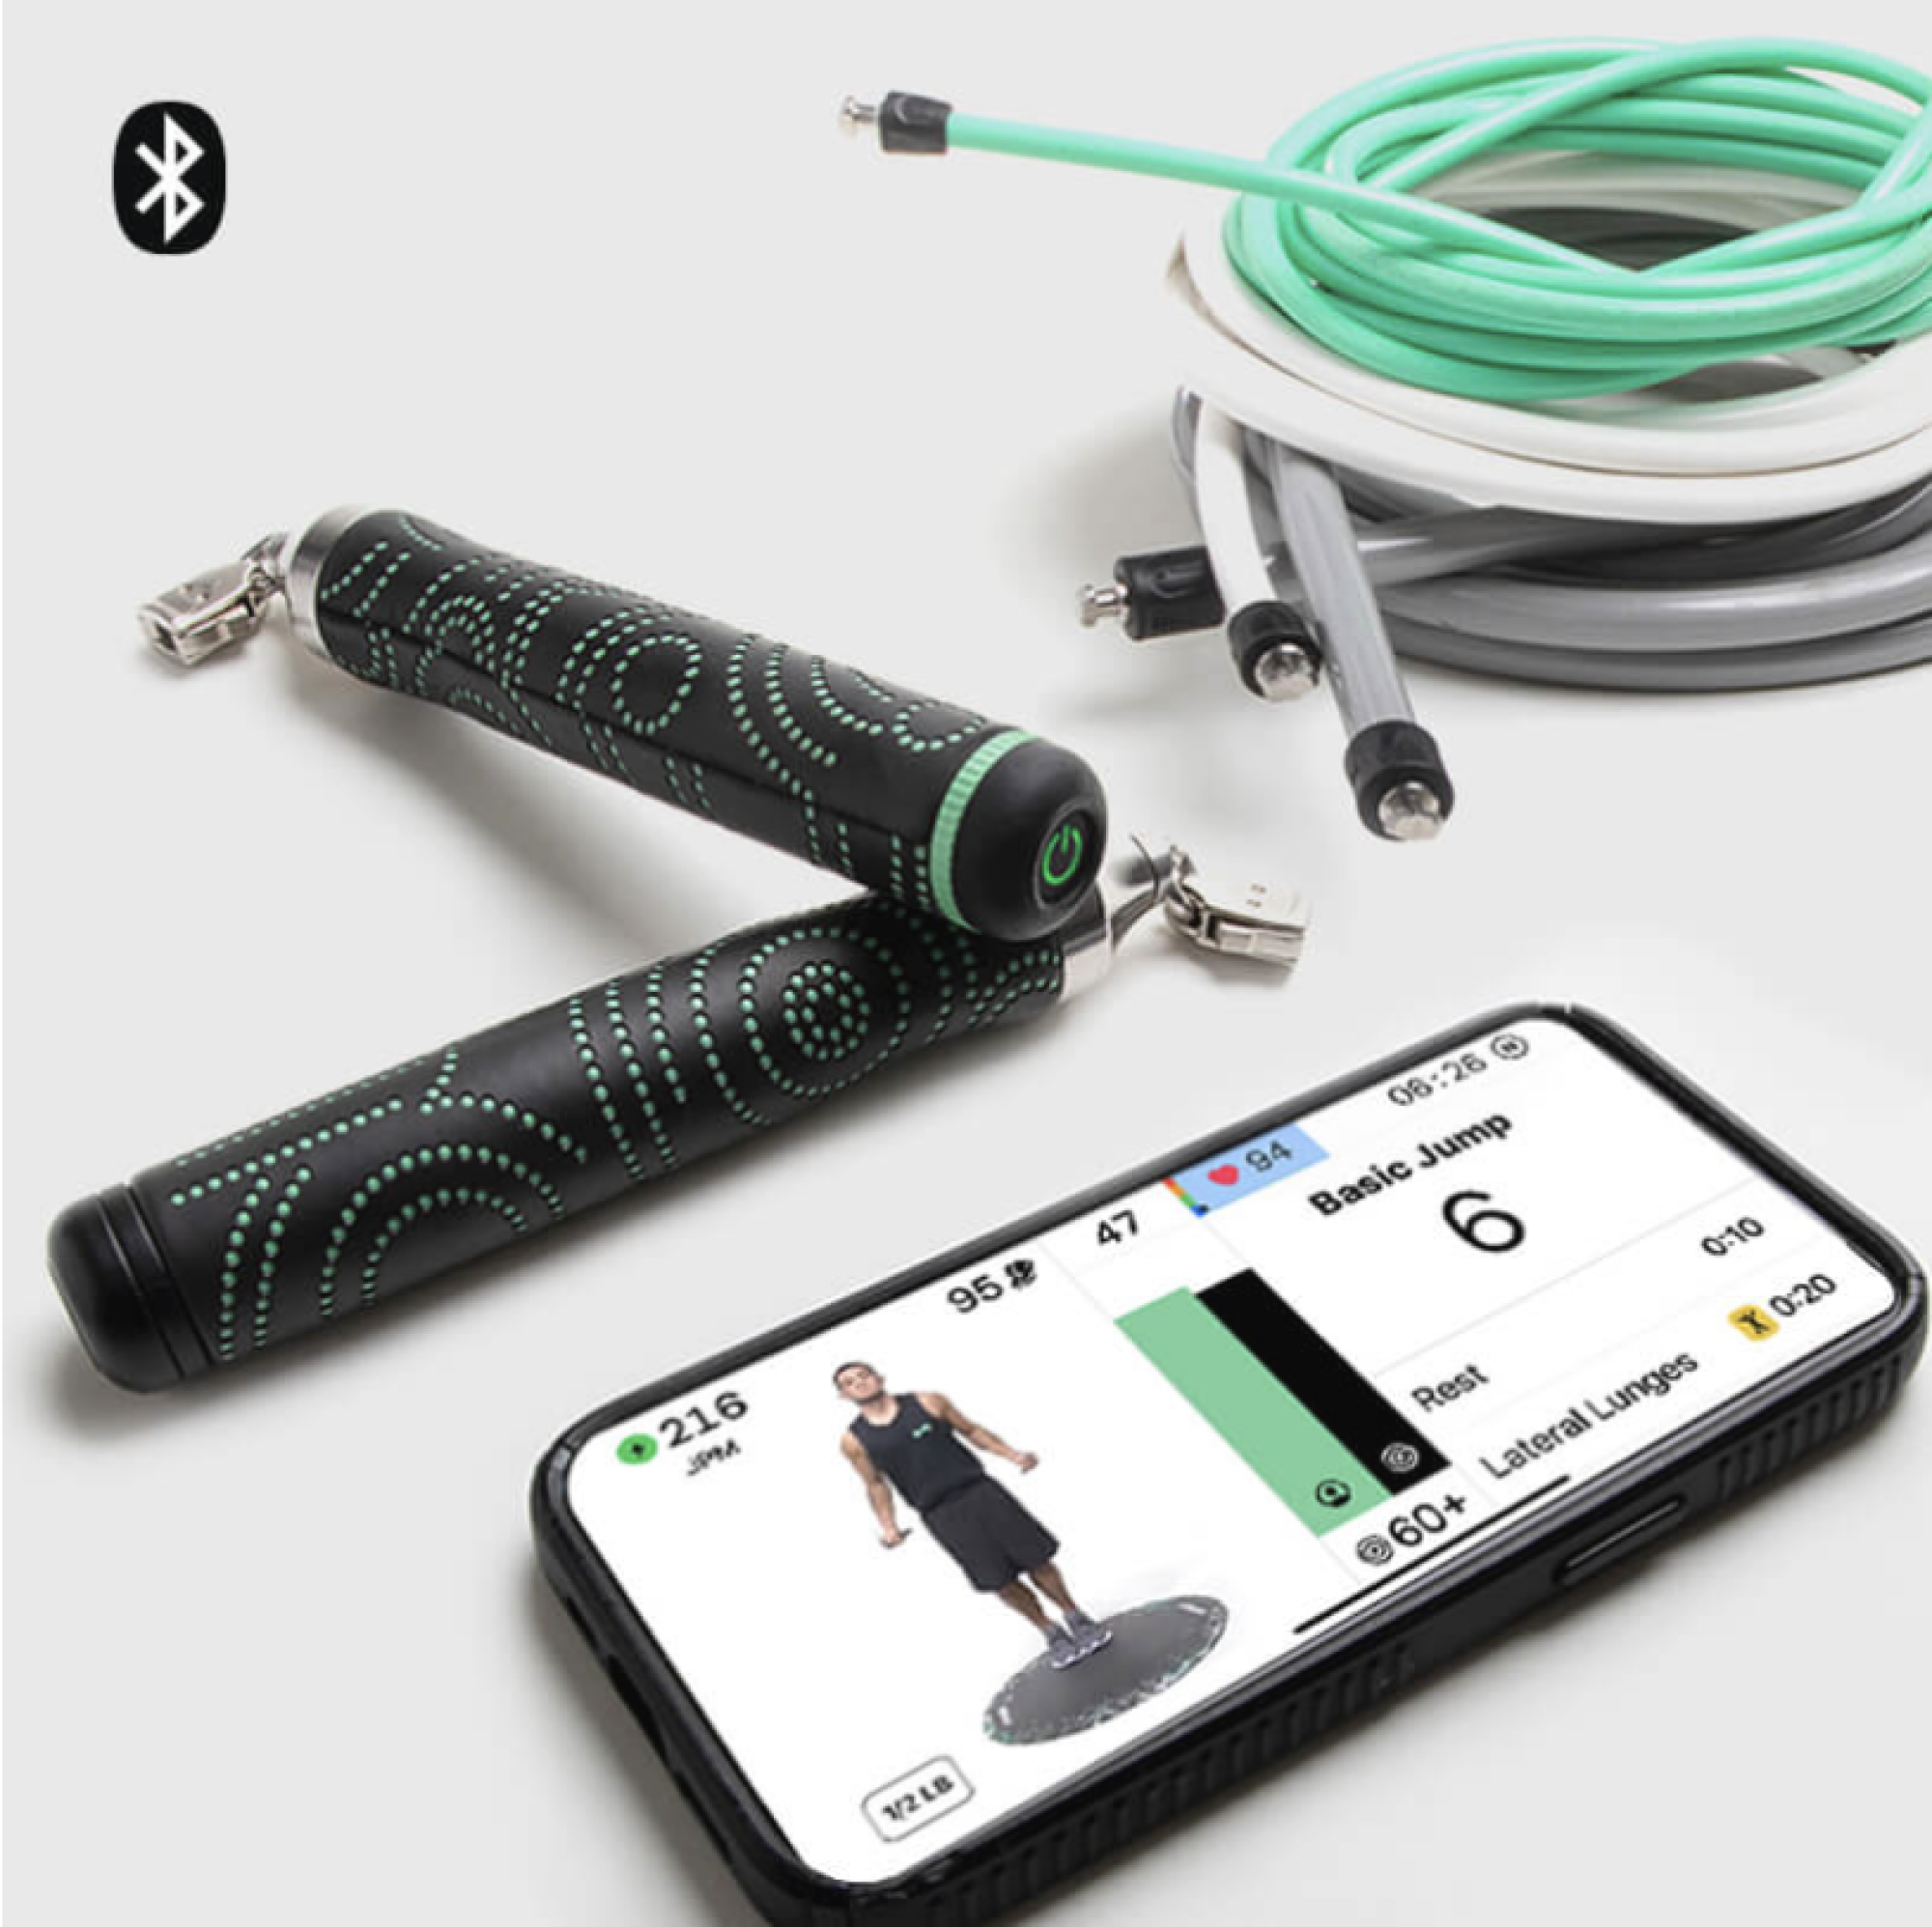 crossrope weighted jump rope with phone app